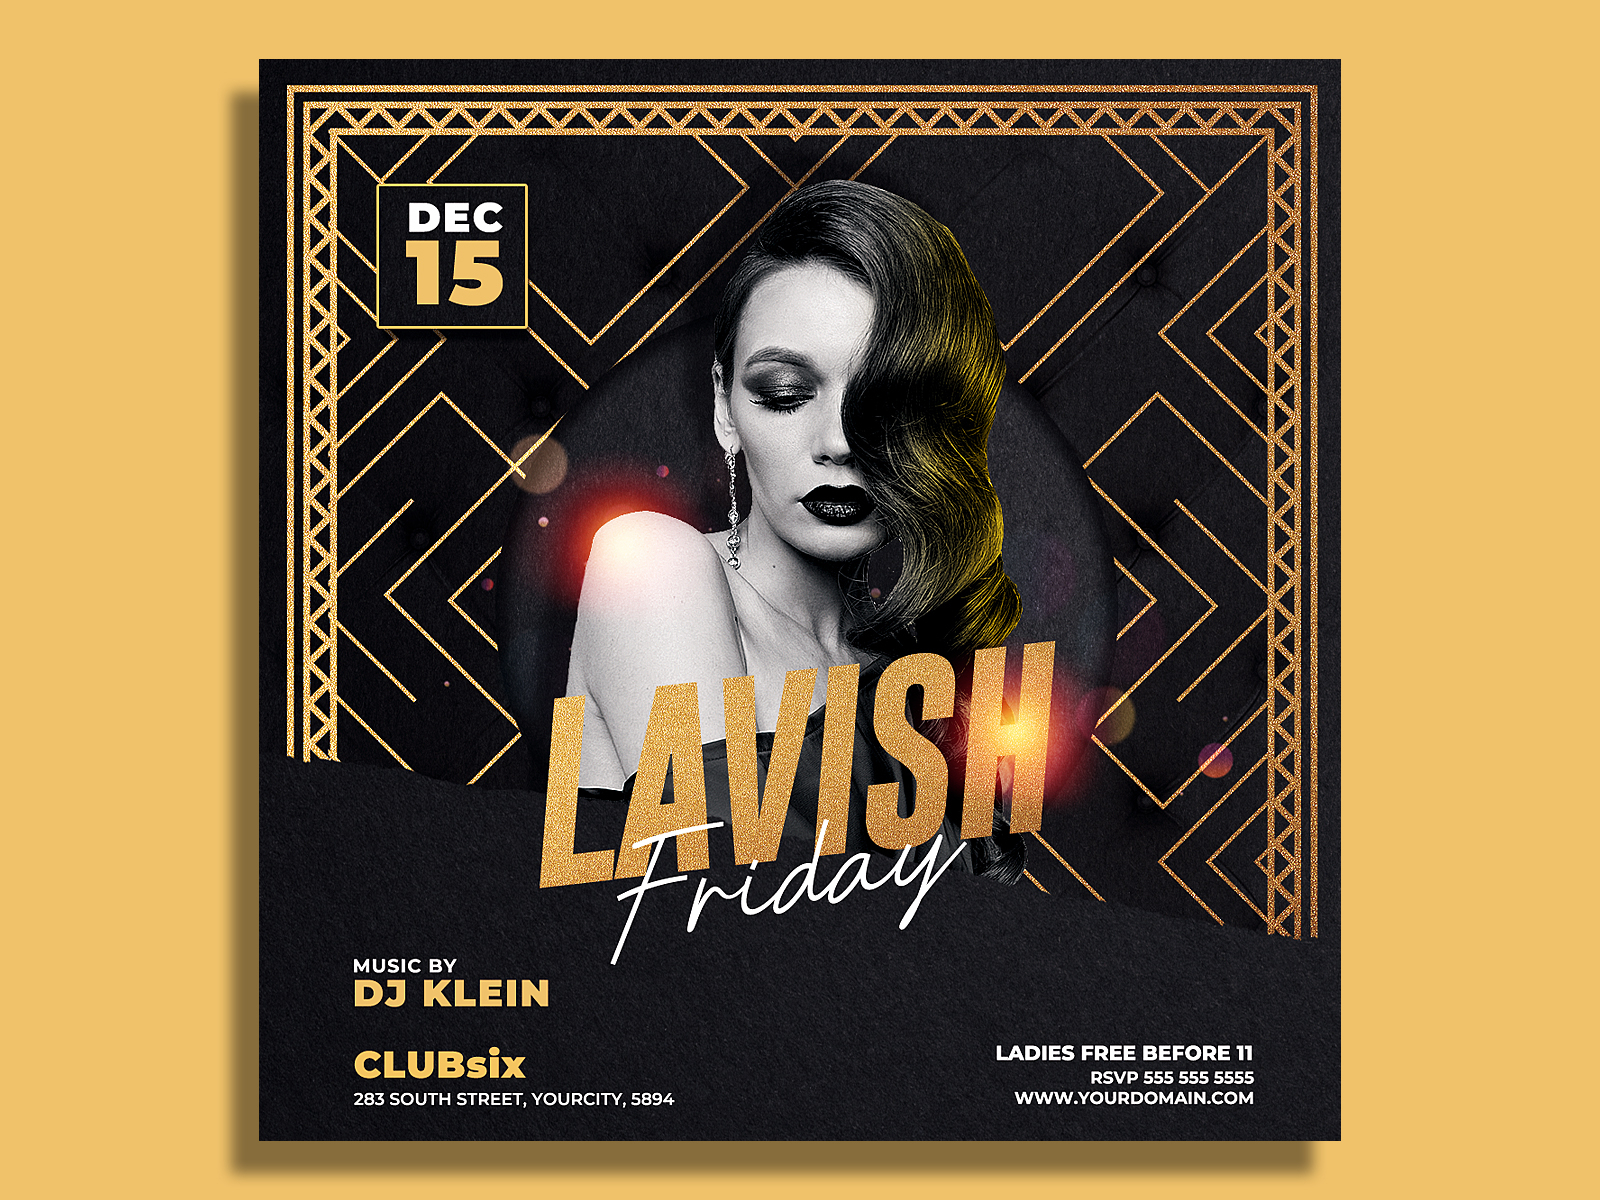 Night Club Flyer Template By Hotpin On Dribbble